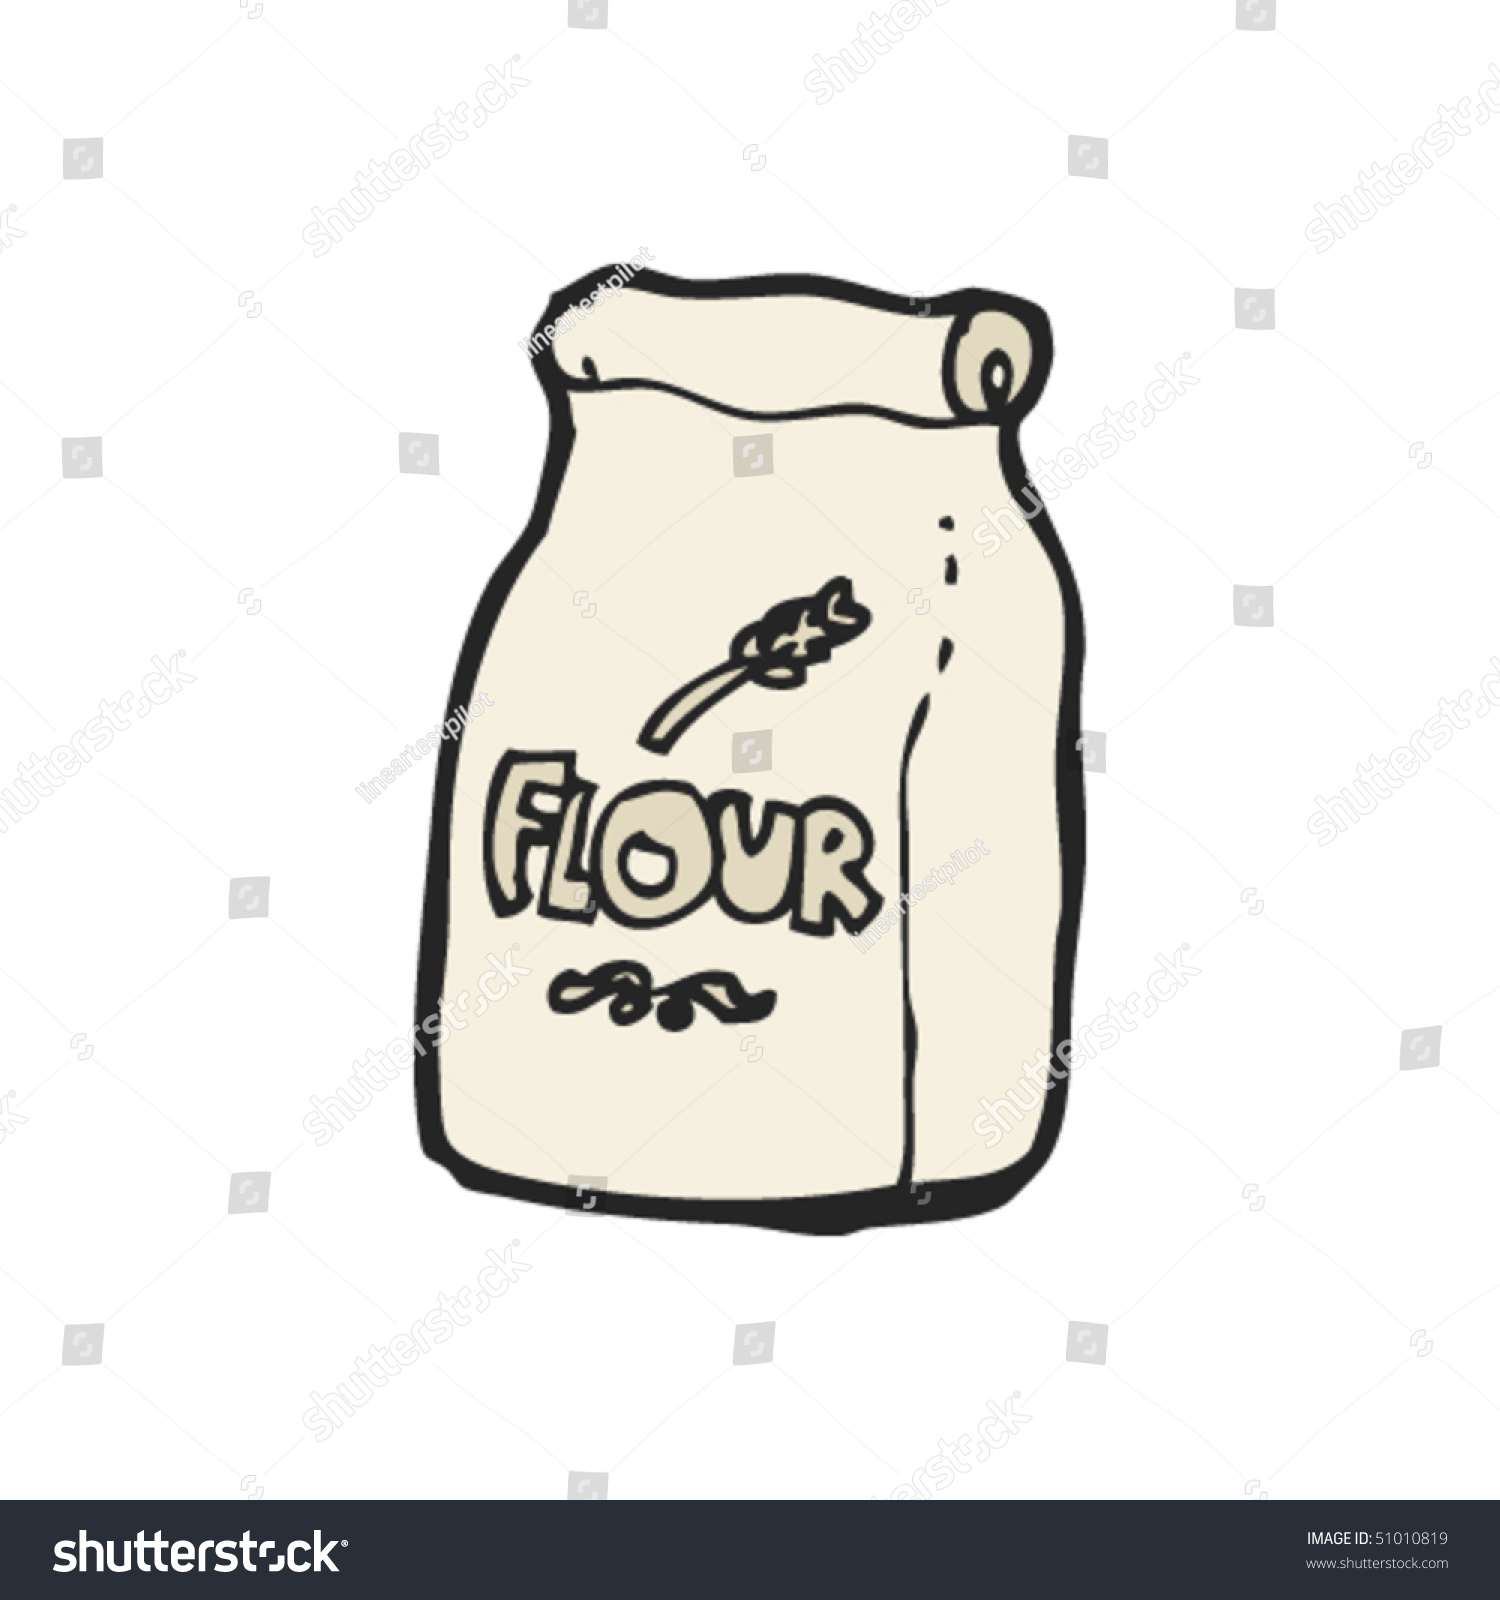 Quirky Drawing Of A Bag Of Flour Stock Vector Illustration 51010819